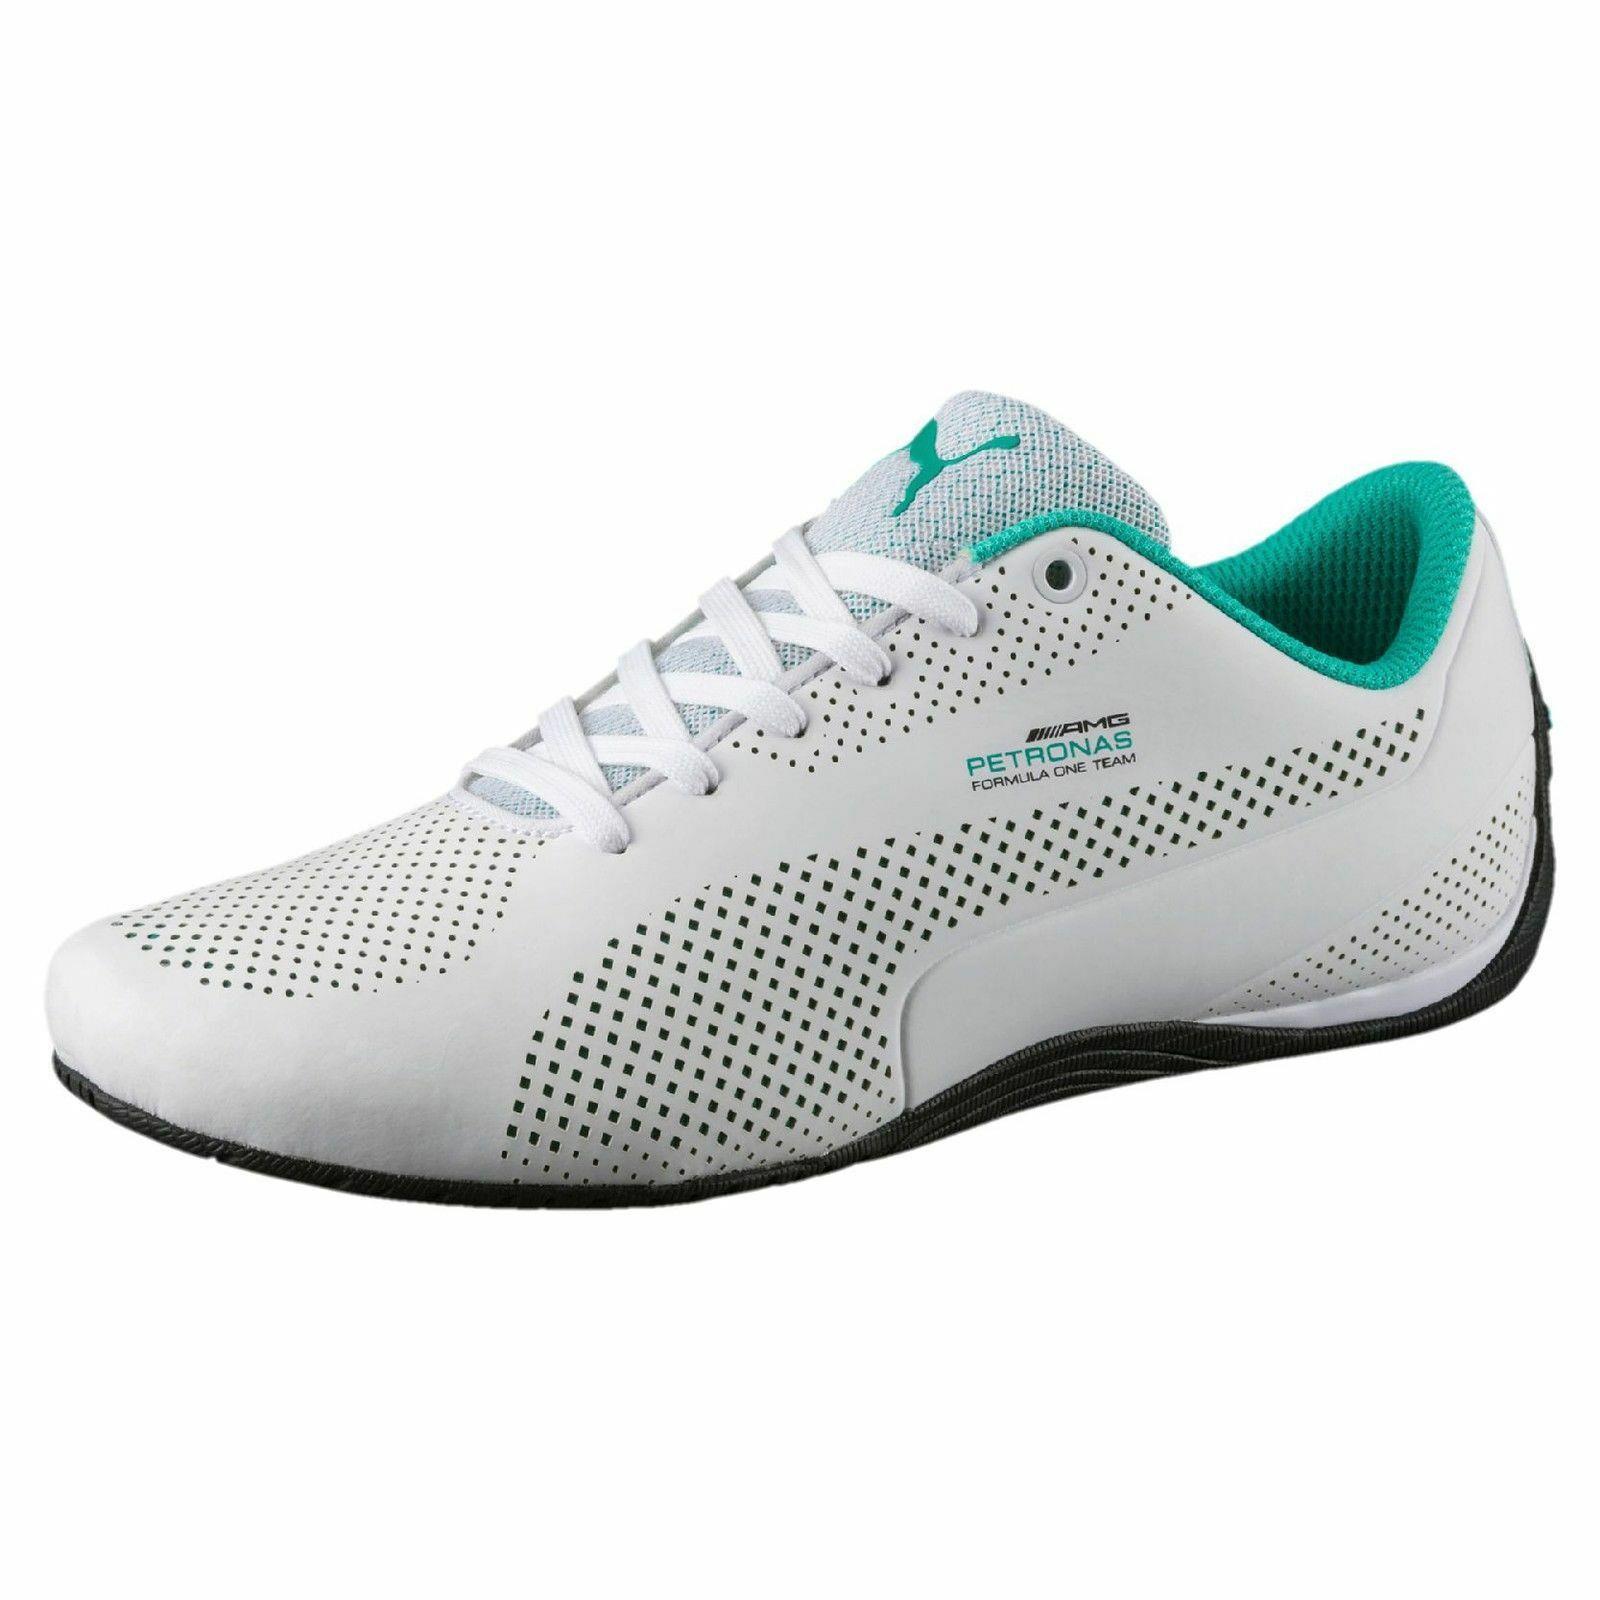 Mens Puma Mercedes Amg Cat 5 Ultra Leather Shoes White Teal Black 305978 01